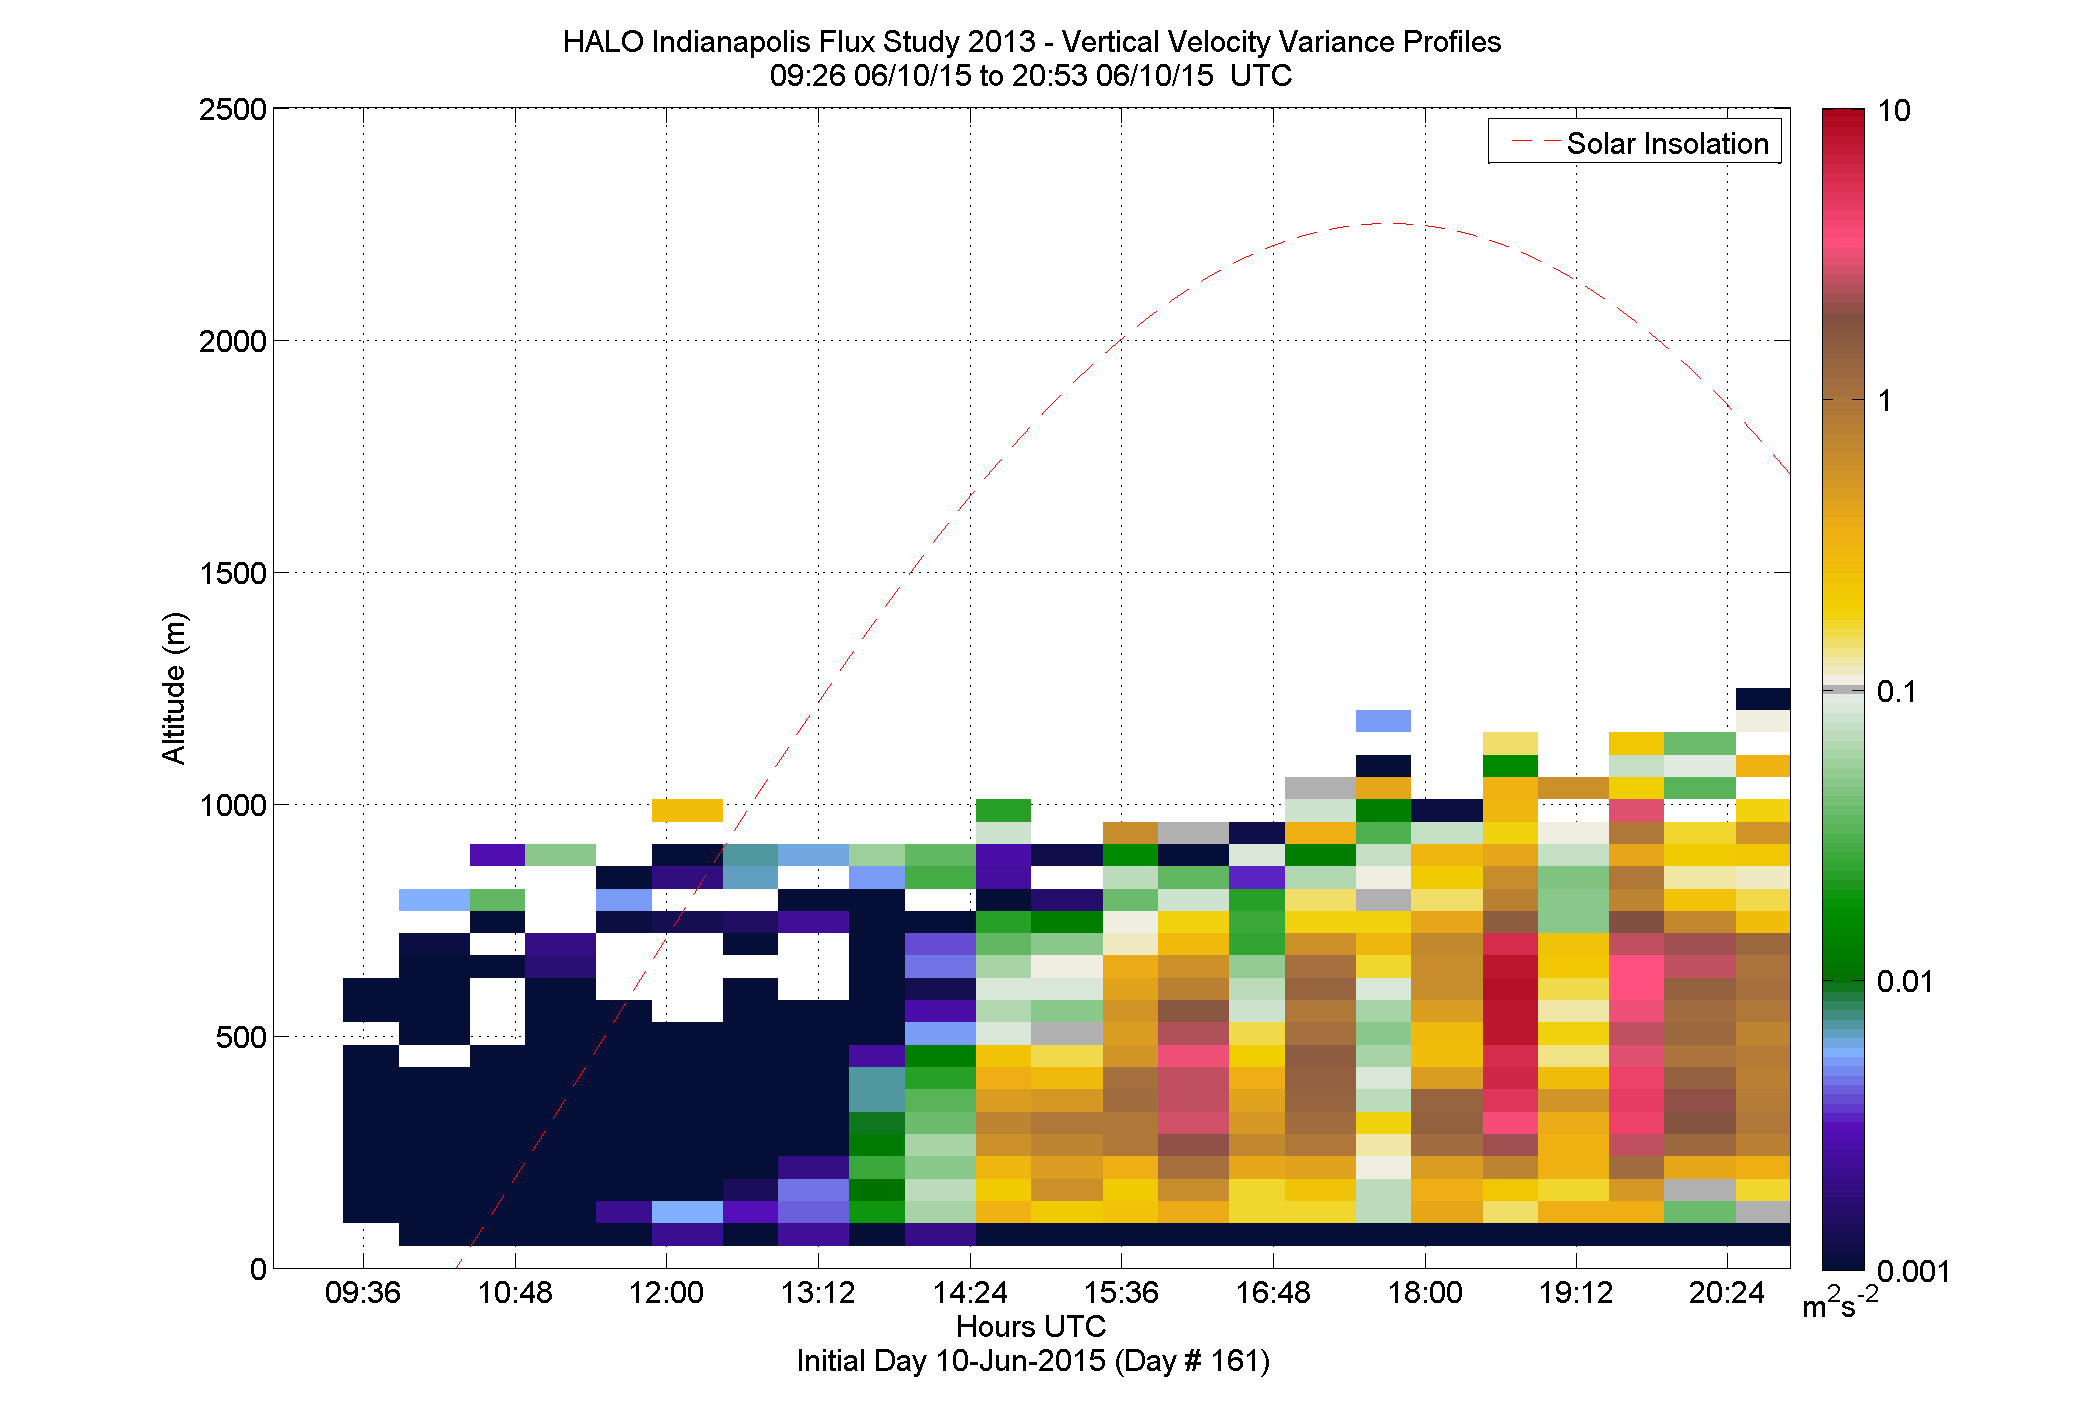 HALO latest vertical variance profile